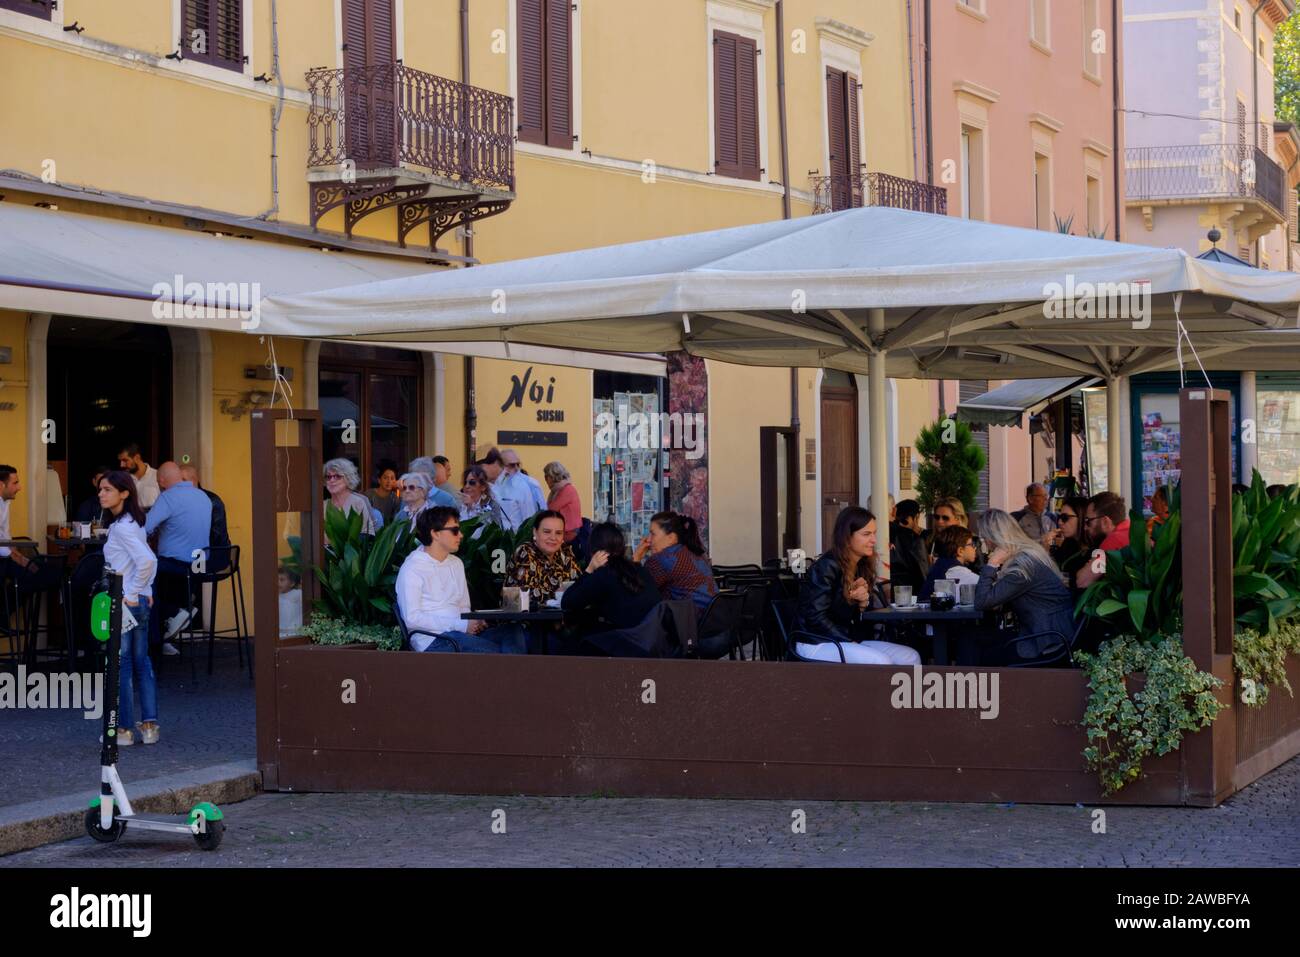 Rimini, Italy - October 20, 2019: Close up of people sitting outside cafe in Piazza Cavour (Cavour Square) with some motion blurred pedestrians Stock Photo